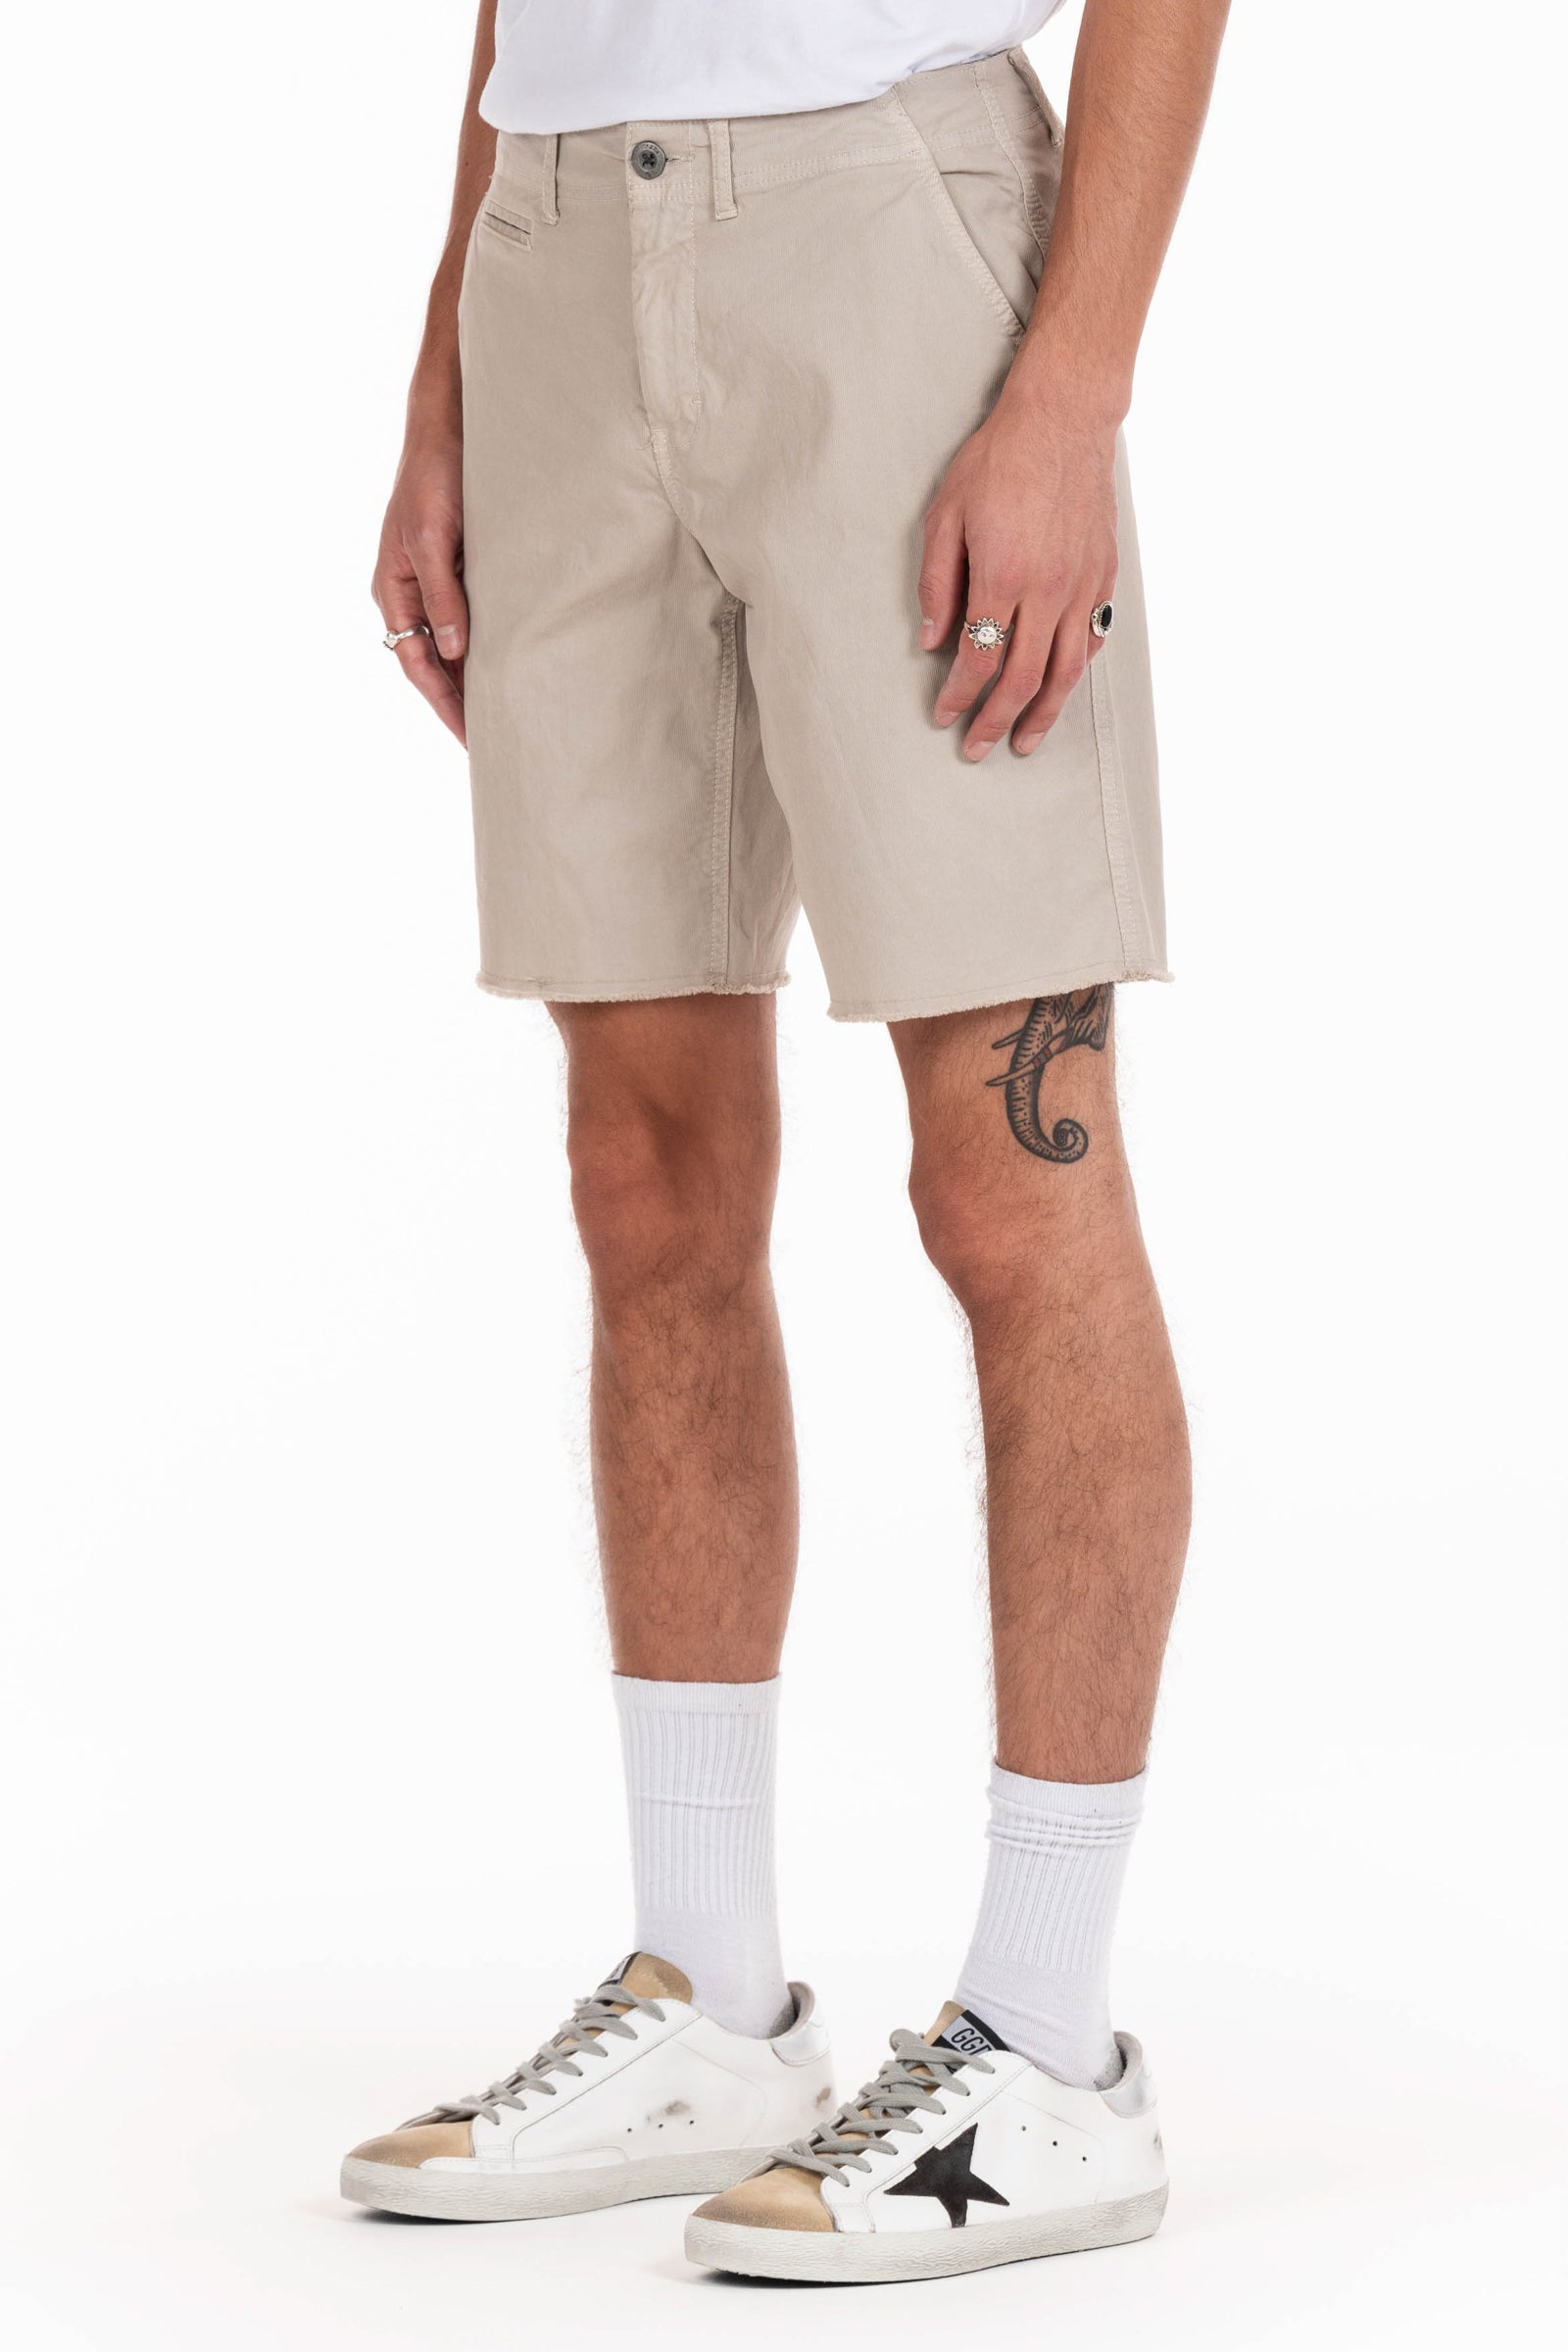 Original Paperbacks Brentwood Chino Short in Bone on Model Cropped Side View